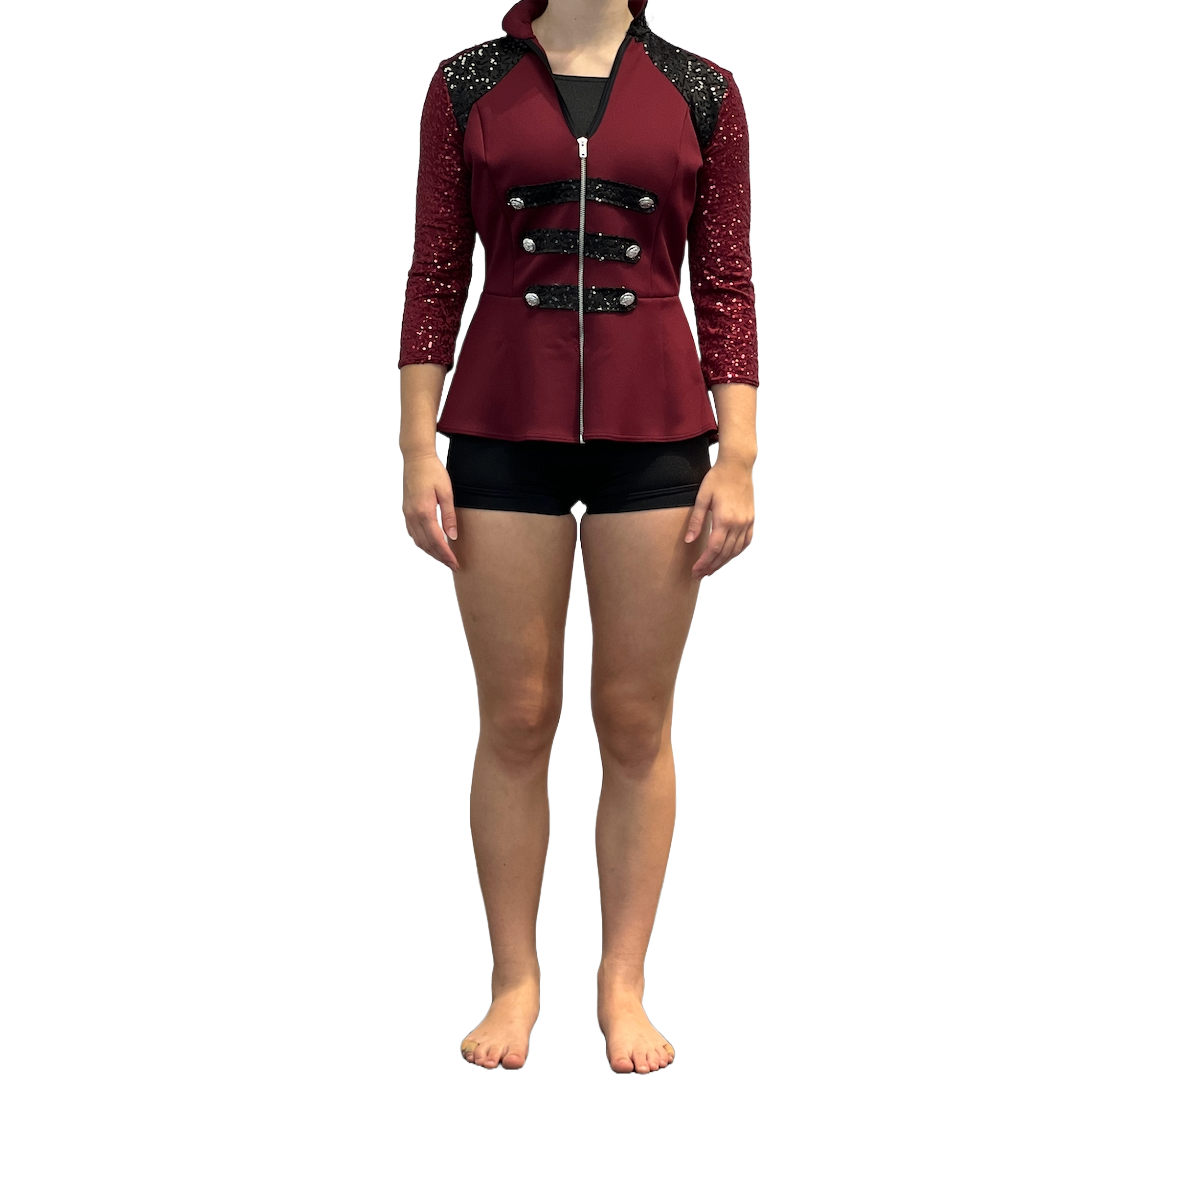 Maroon Peplum Jacket with Silver buttons